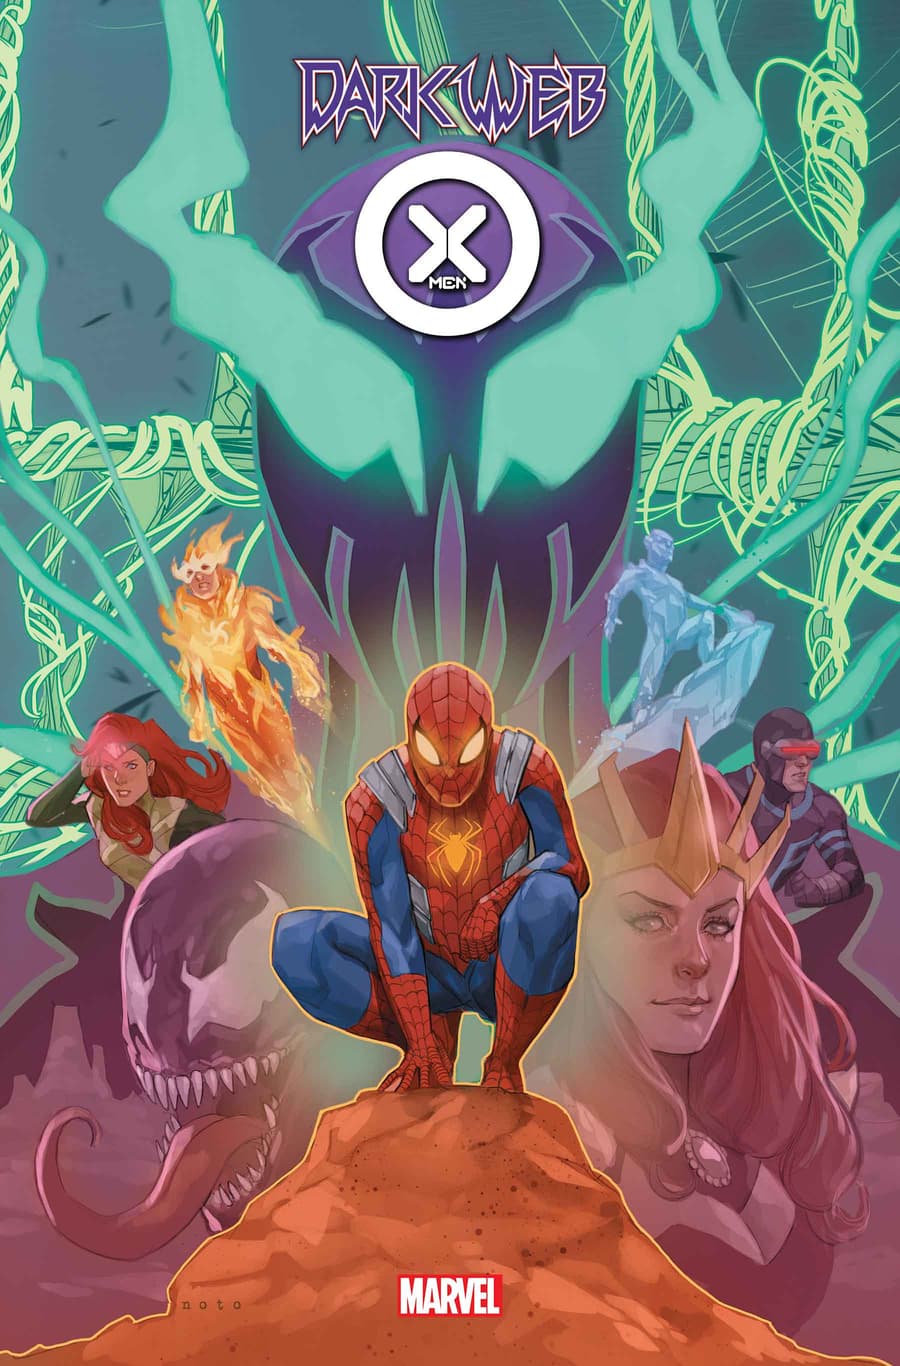 Spider-Man, the X-Men, Ms. Marvel, Venom, and More Are Ensnared in 